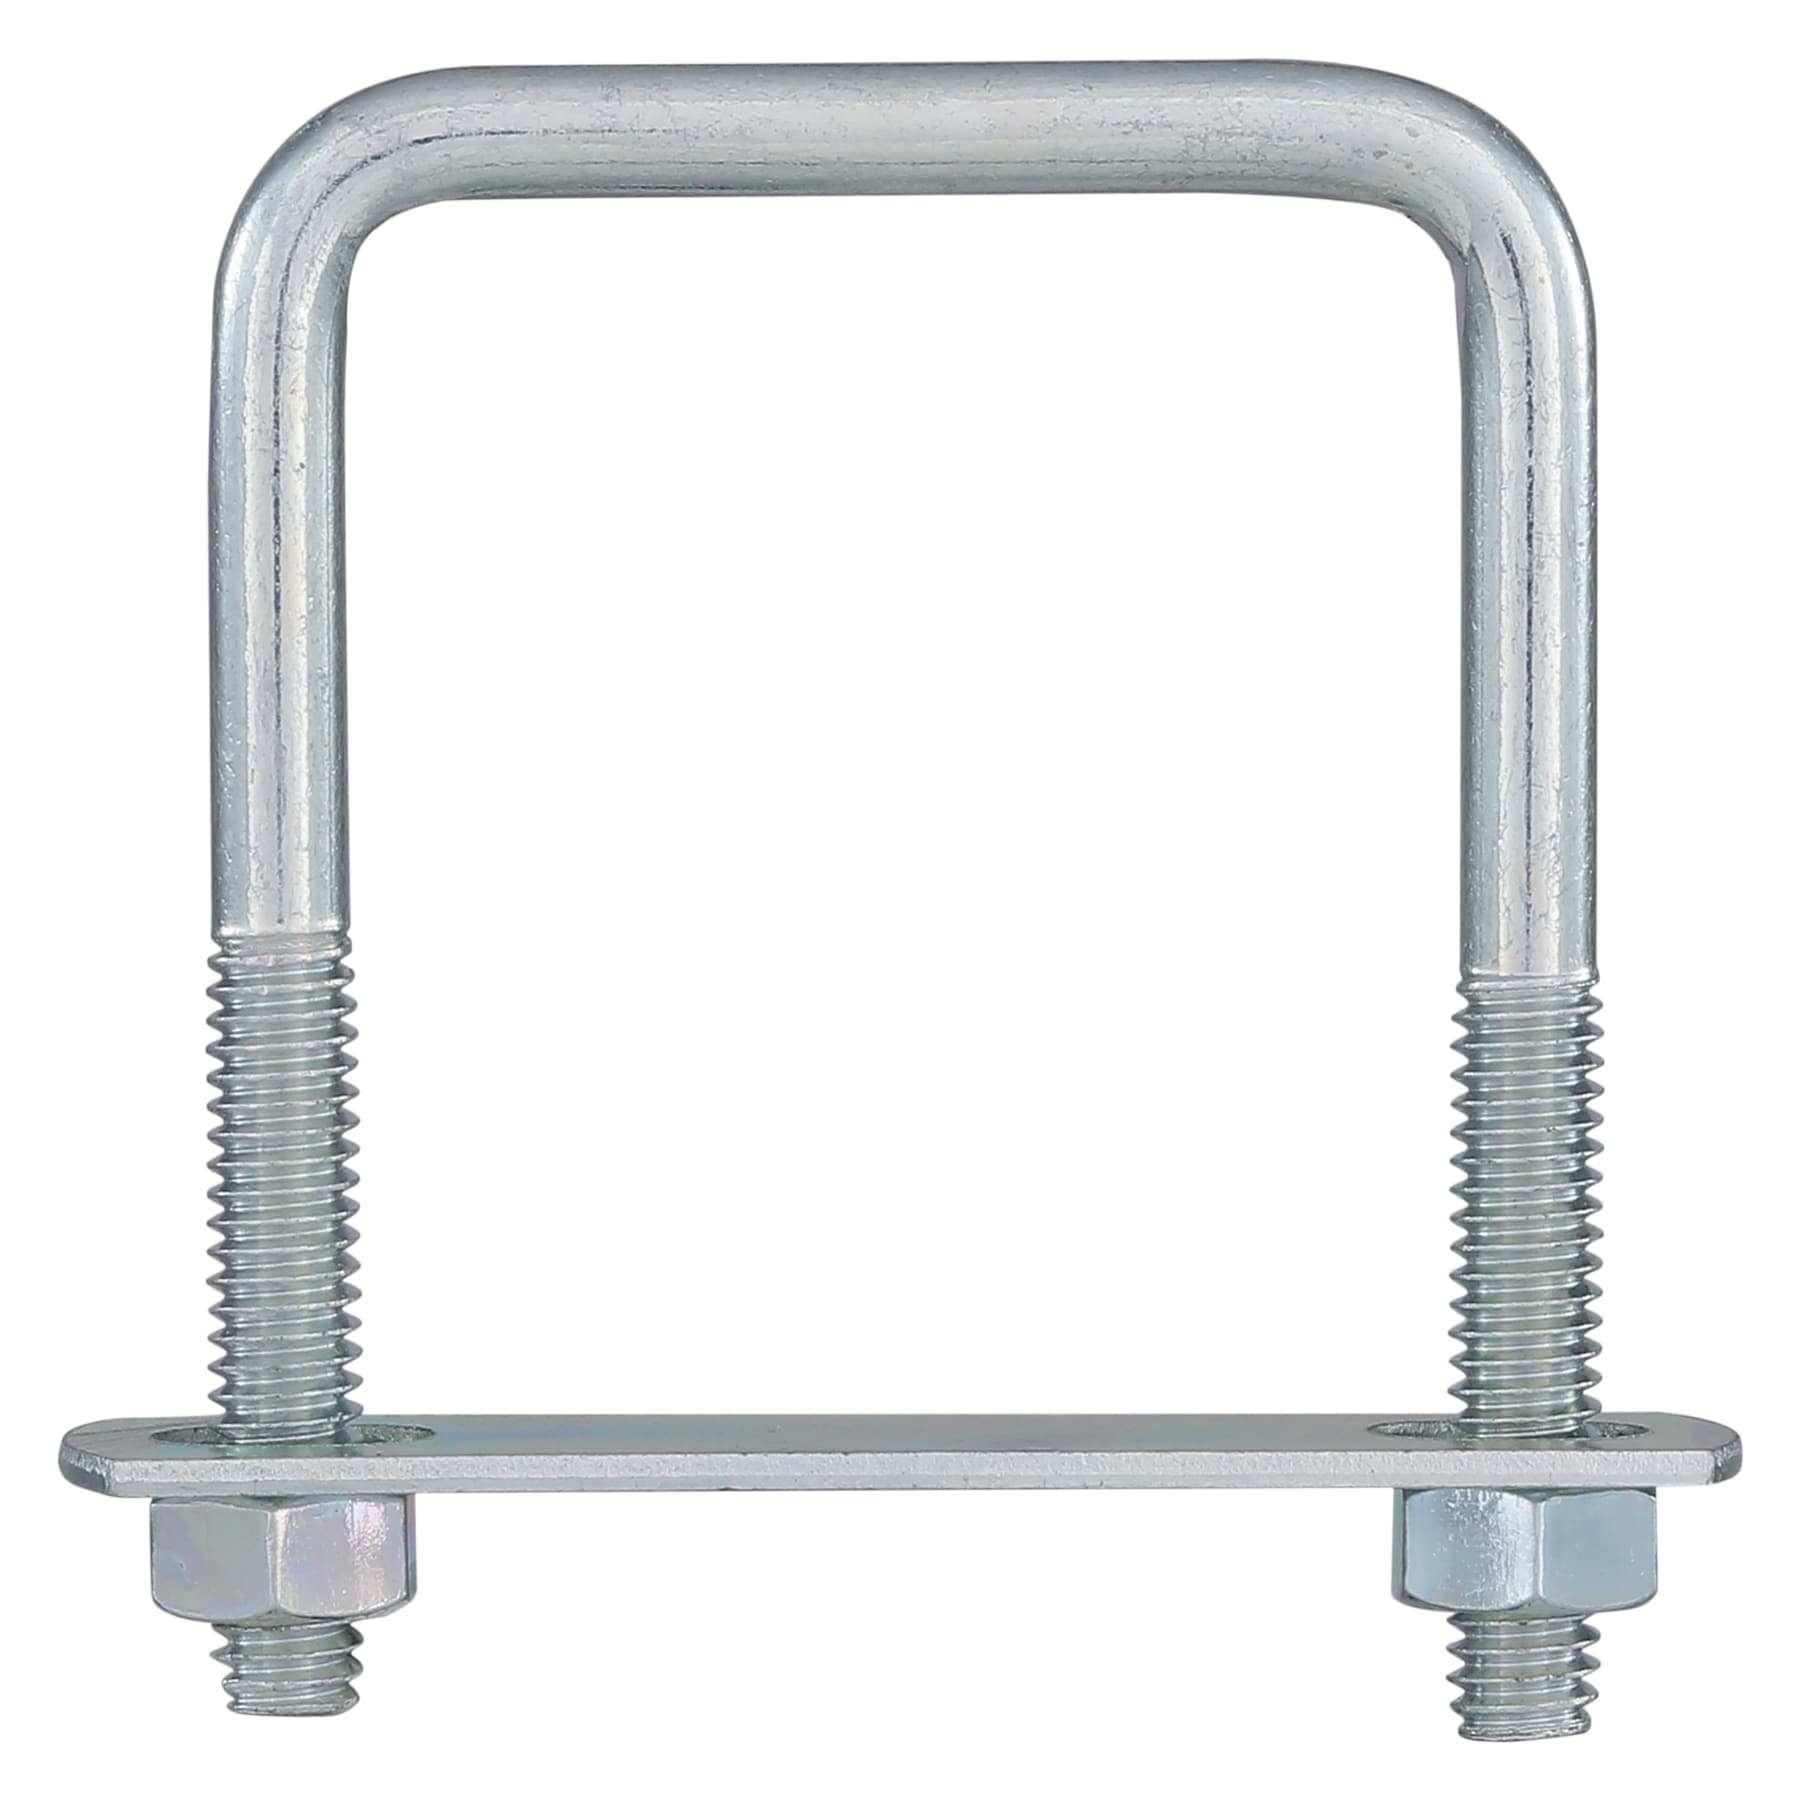 National Hardware 3.93-in Zinc Plated Steel Gate Hook and Eye in